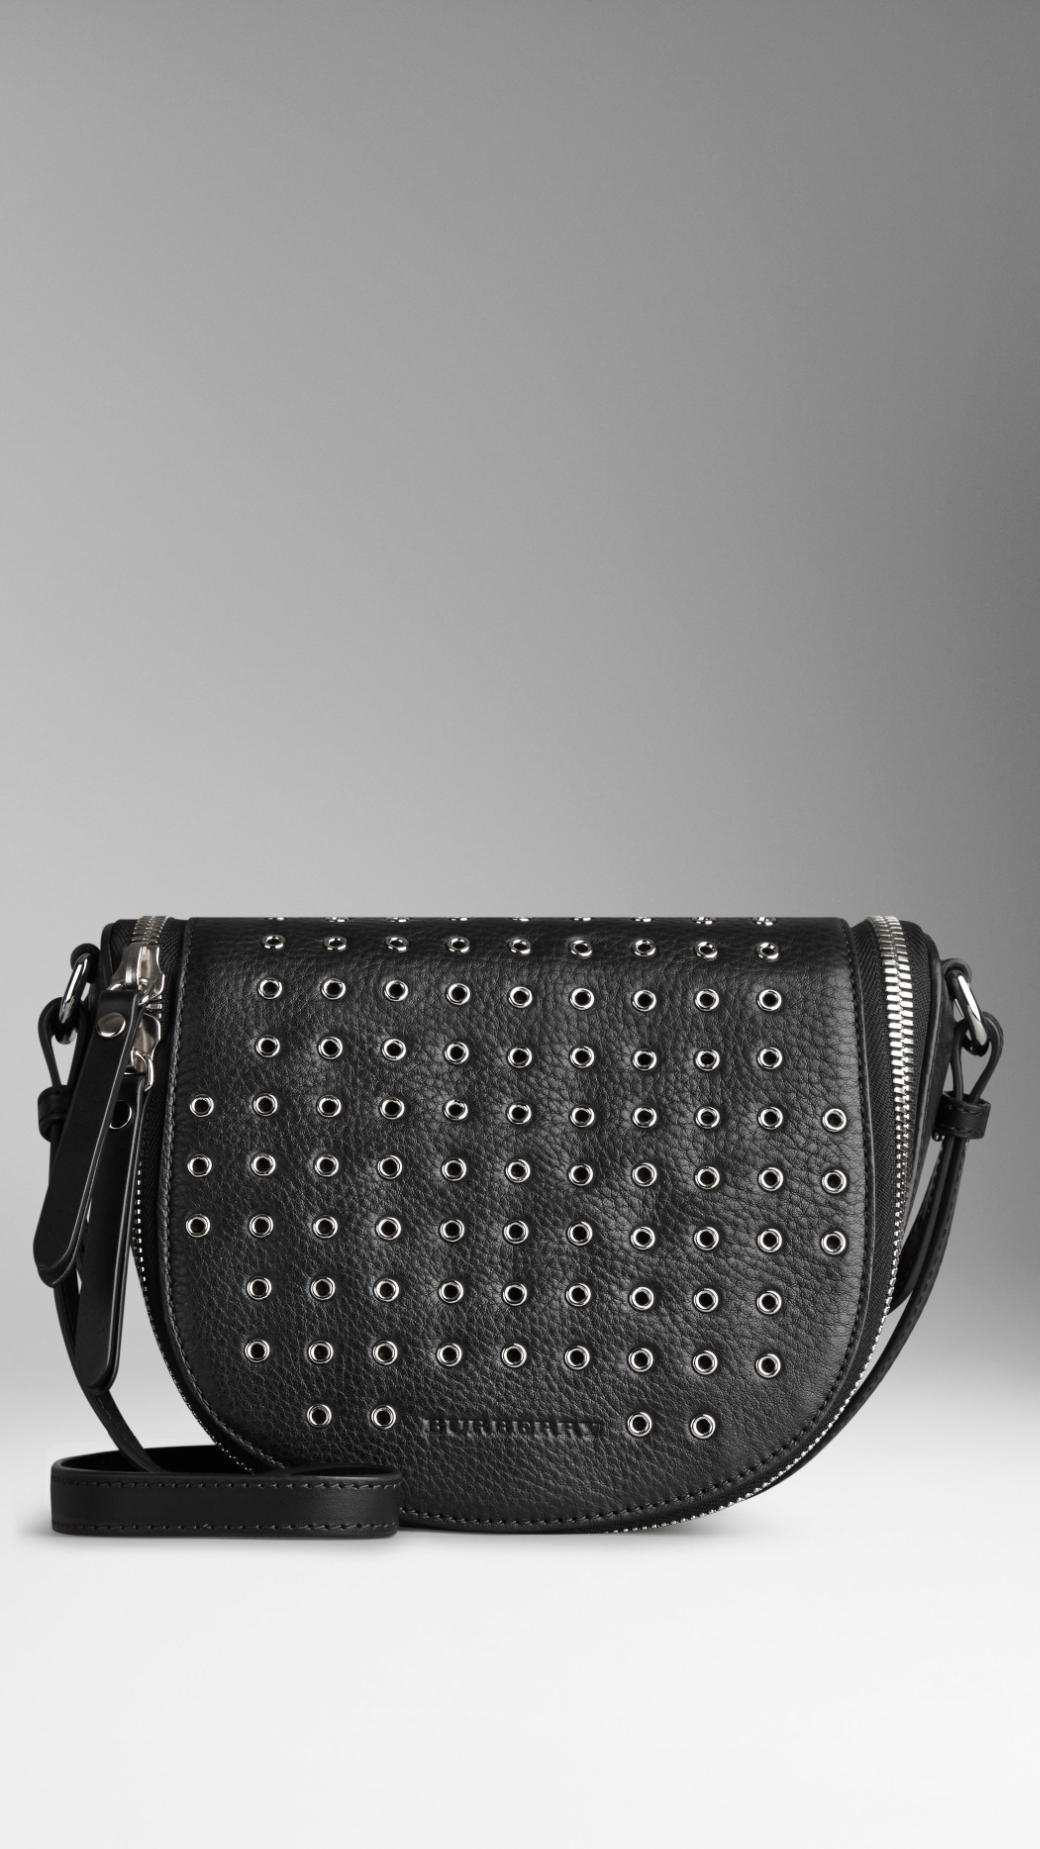 Burberry Small Eyelet Detail Leather Crossbody Bag in Black - Lyst